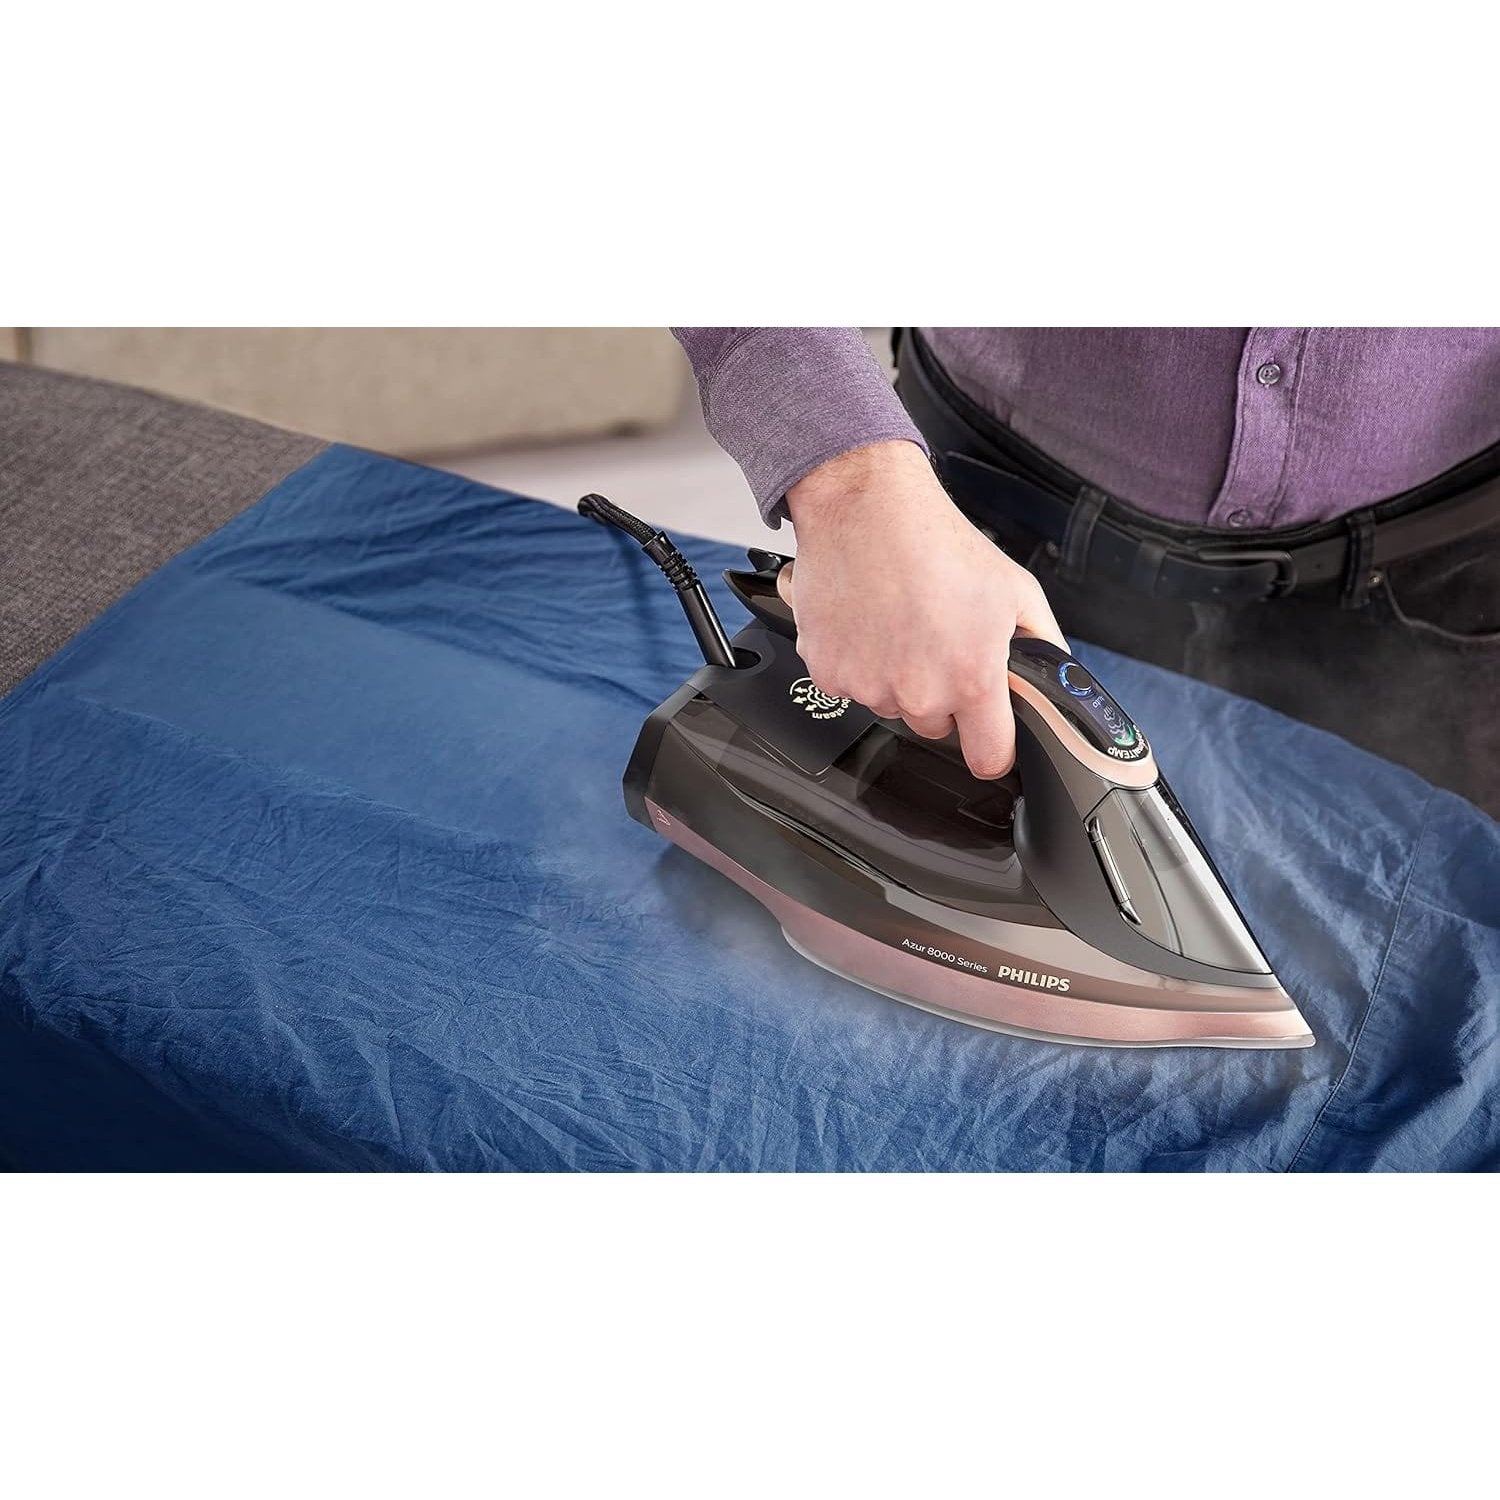 Philips Steam Iron 3000W - DST8041 | Supply Master Accra, Ghana Electric Iron Buy Tools hardware Building materials